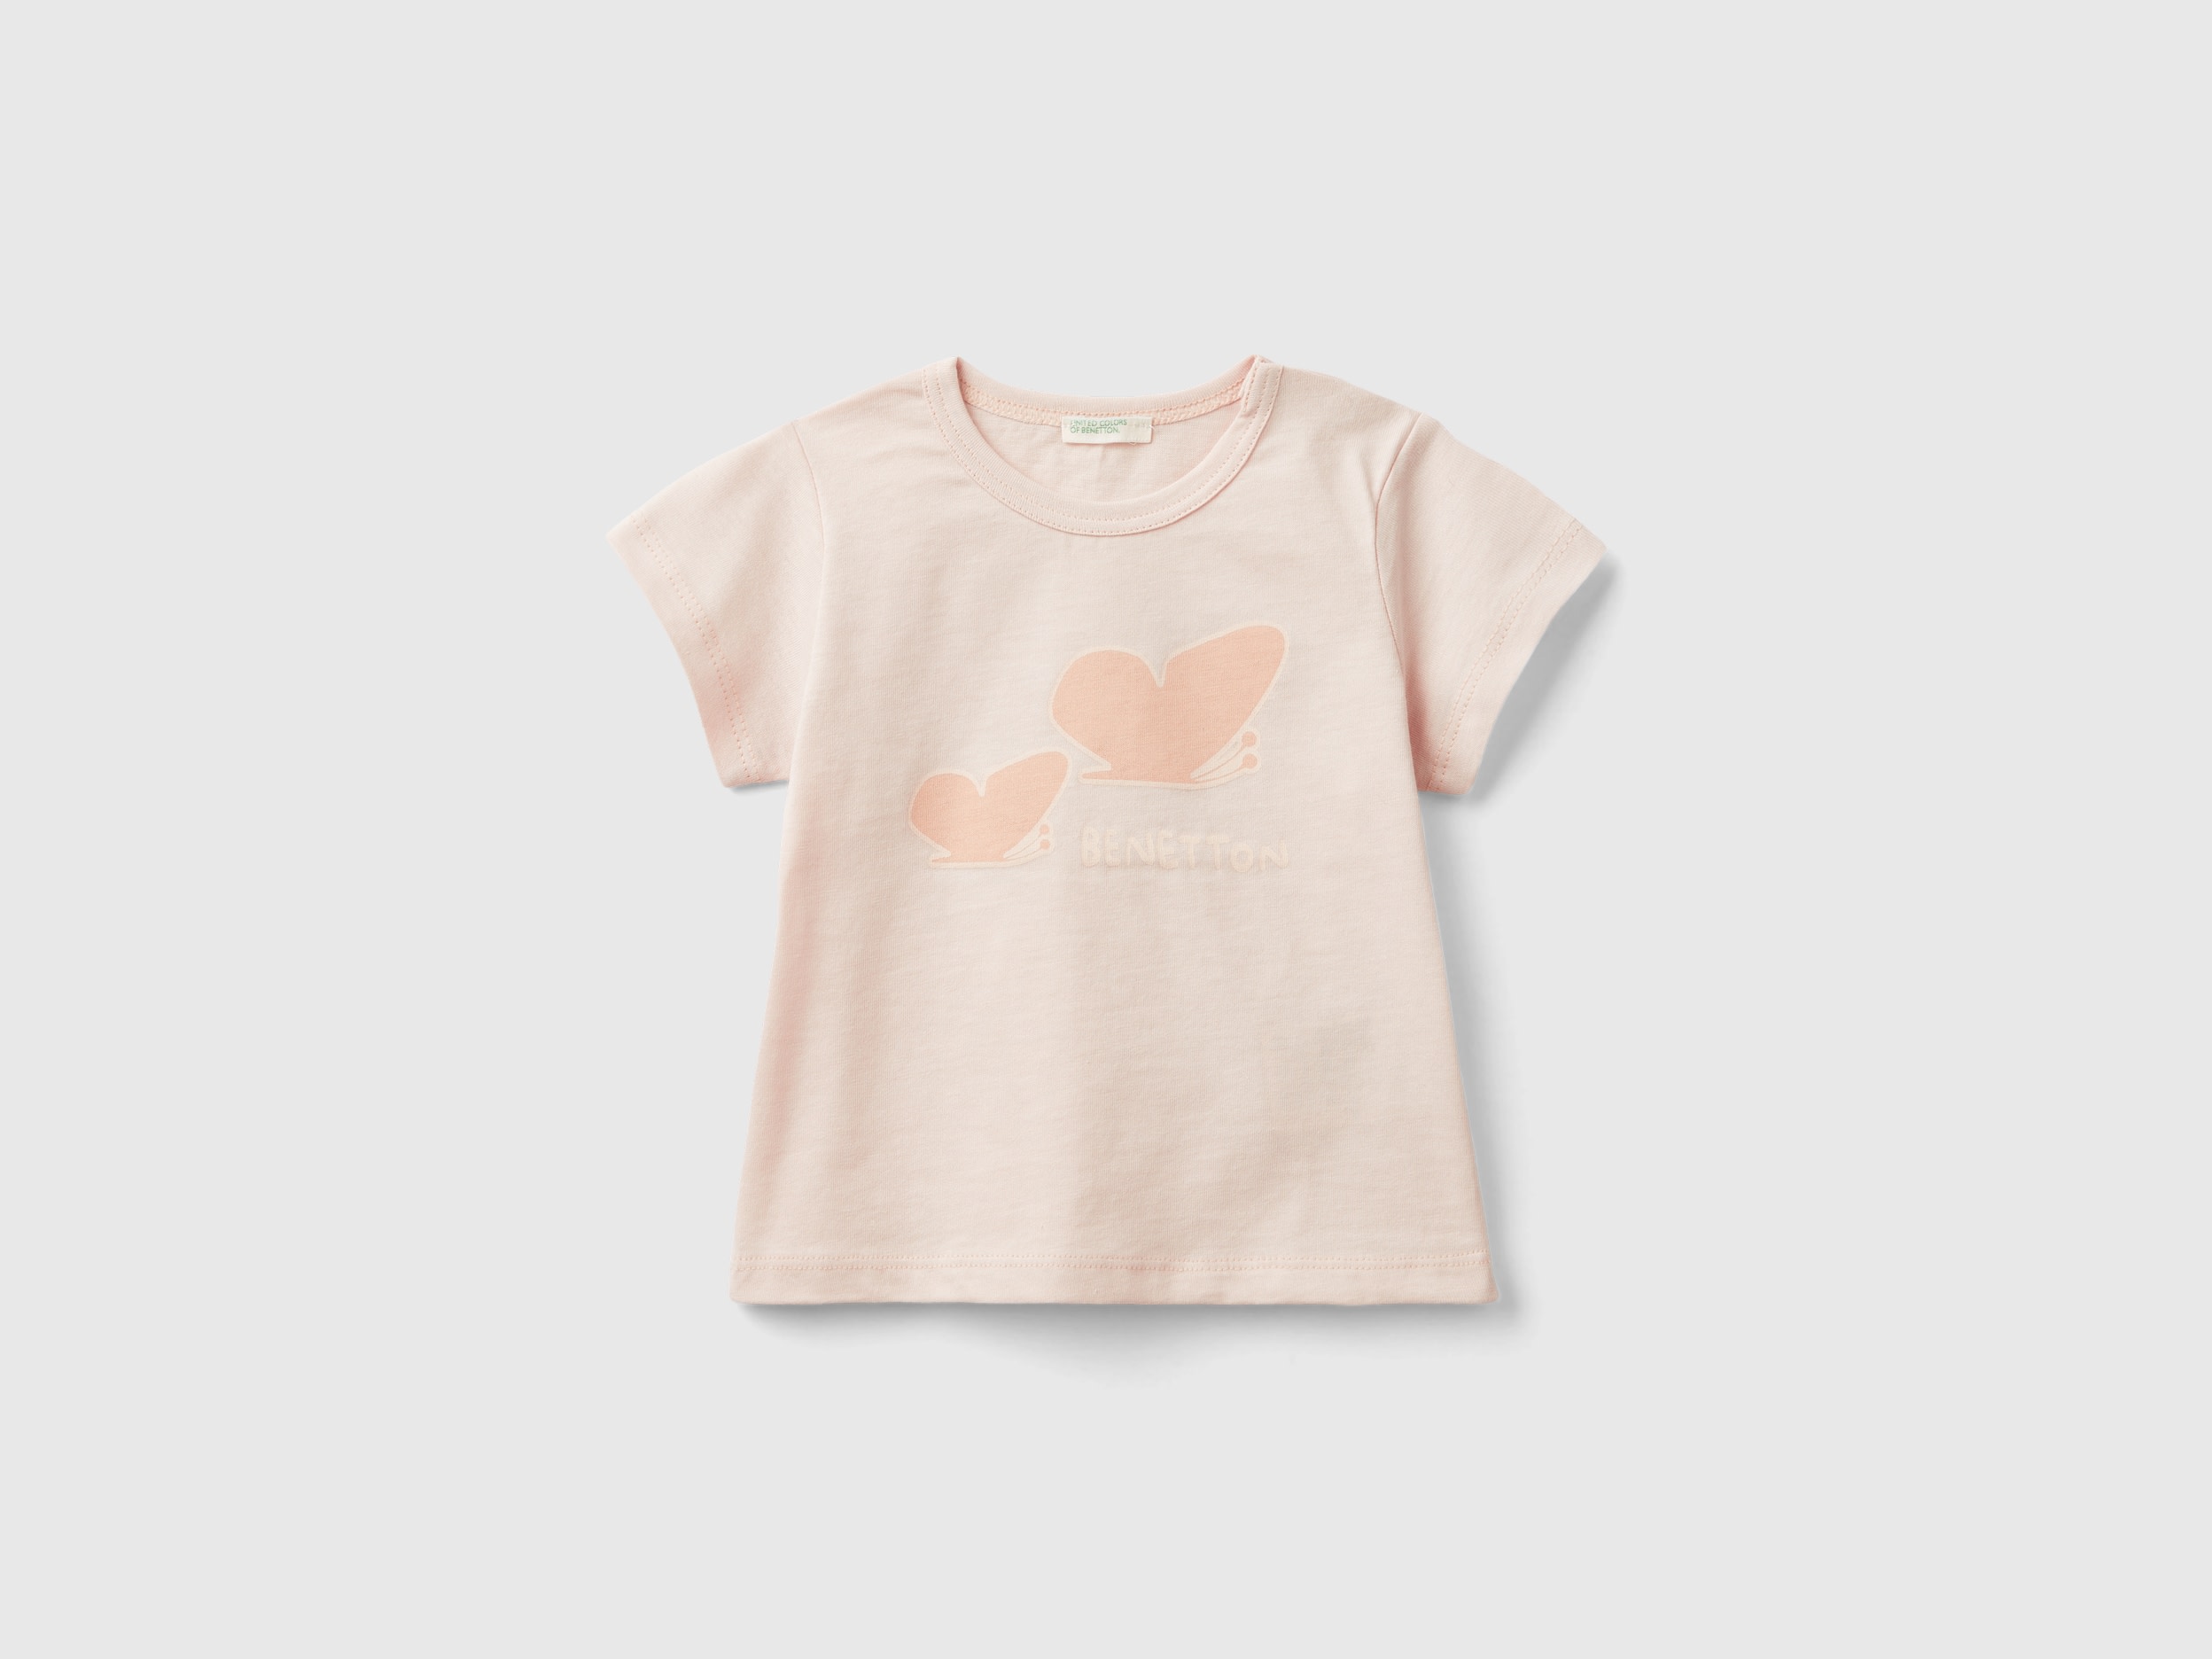 Image of Benetton, Organic Cotton T-shirt With Print, size 62, Peach, Kids